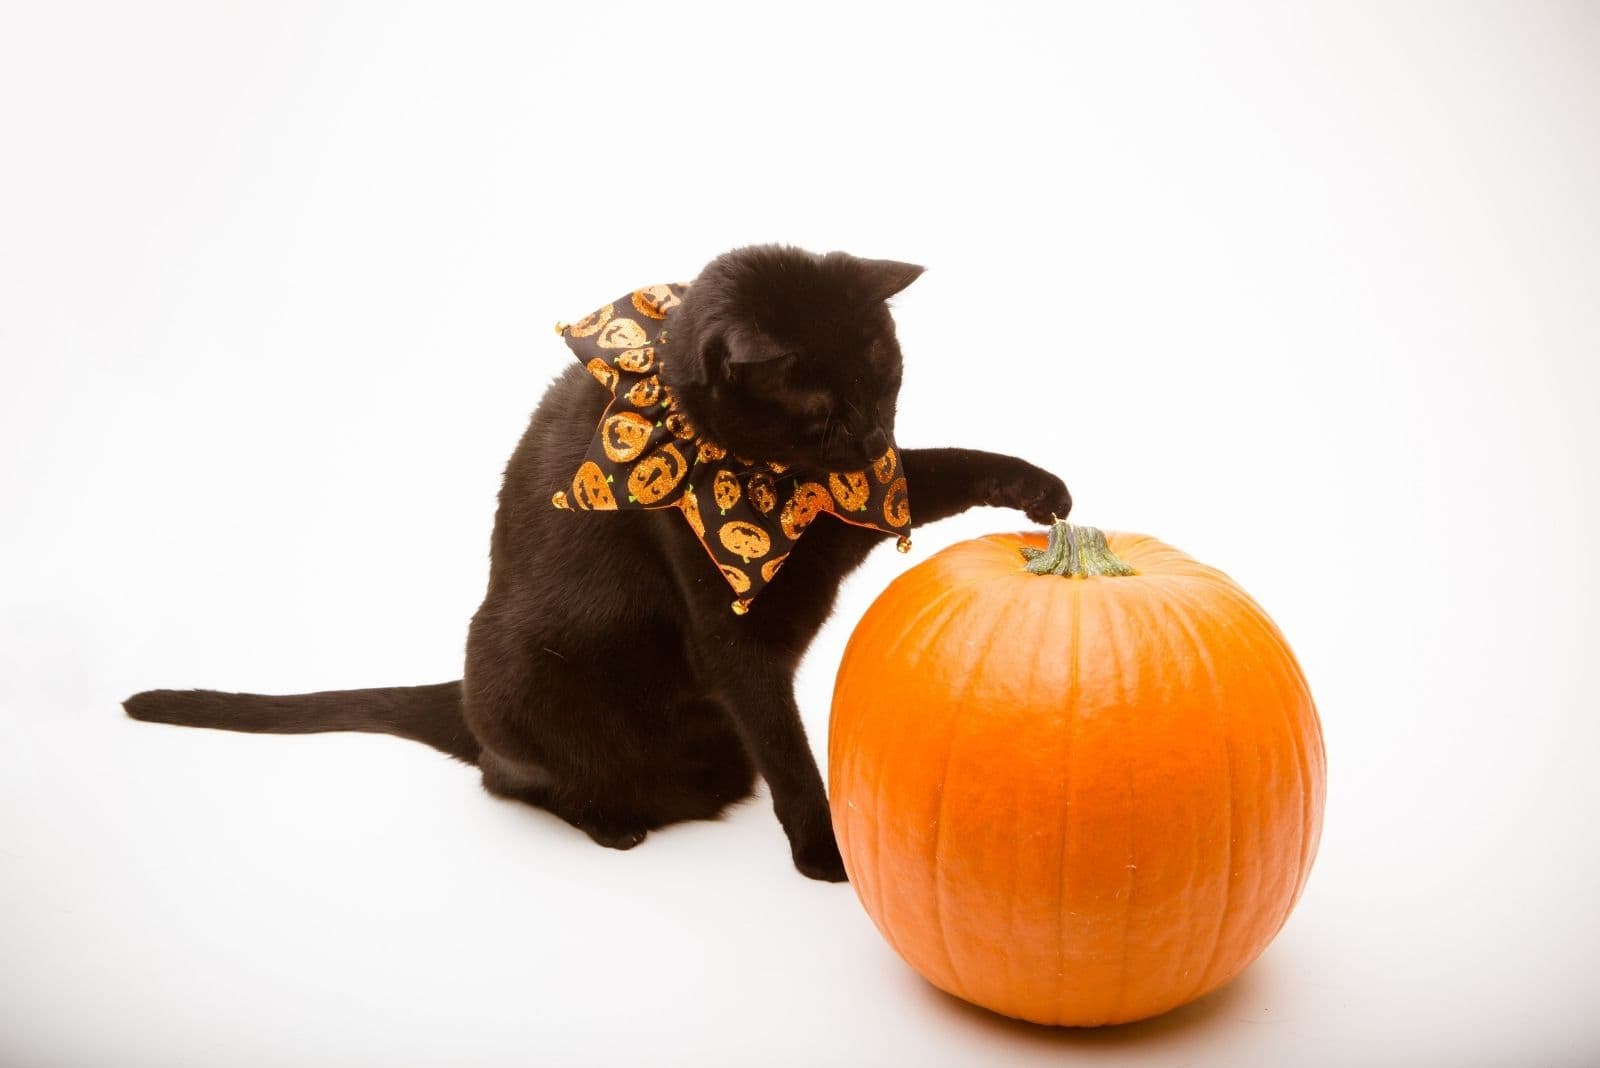 the cat touches the pumpkin with its paw